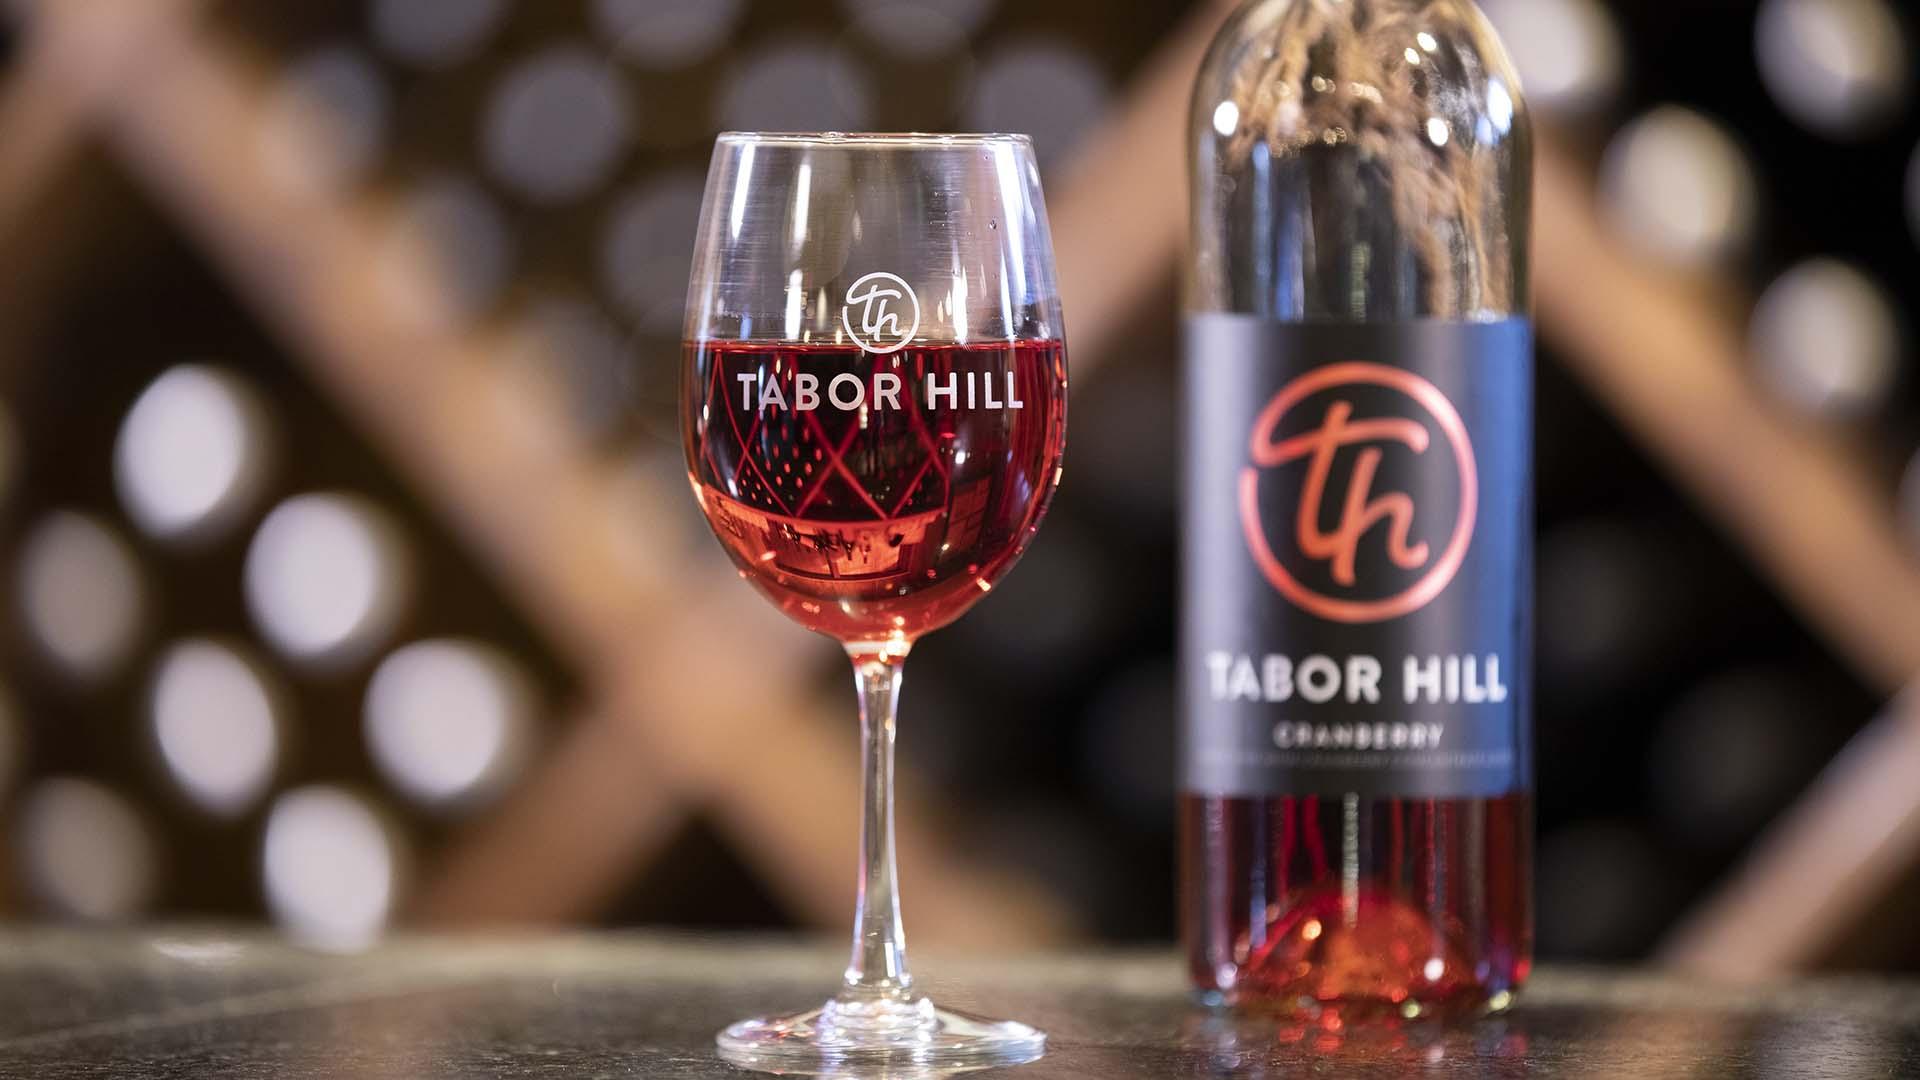 A glass of Tabor Hill cranberry wine